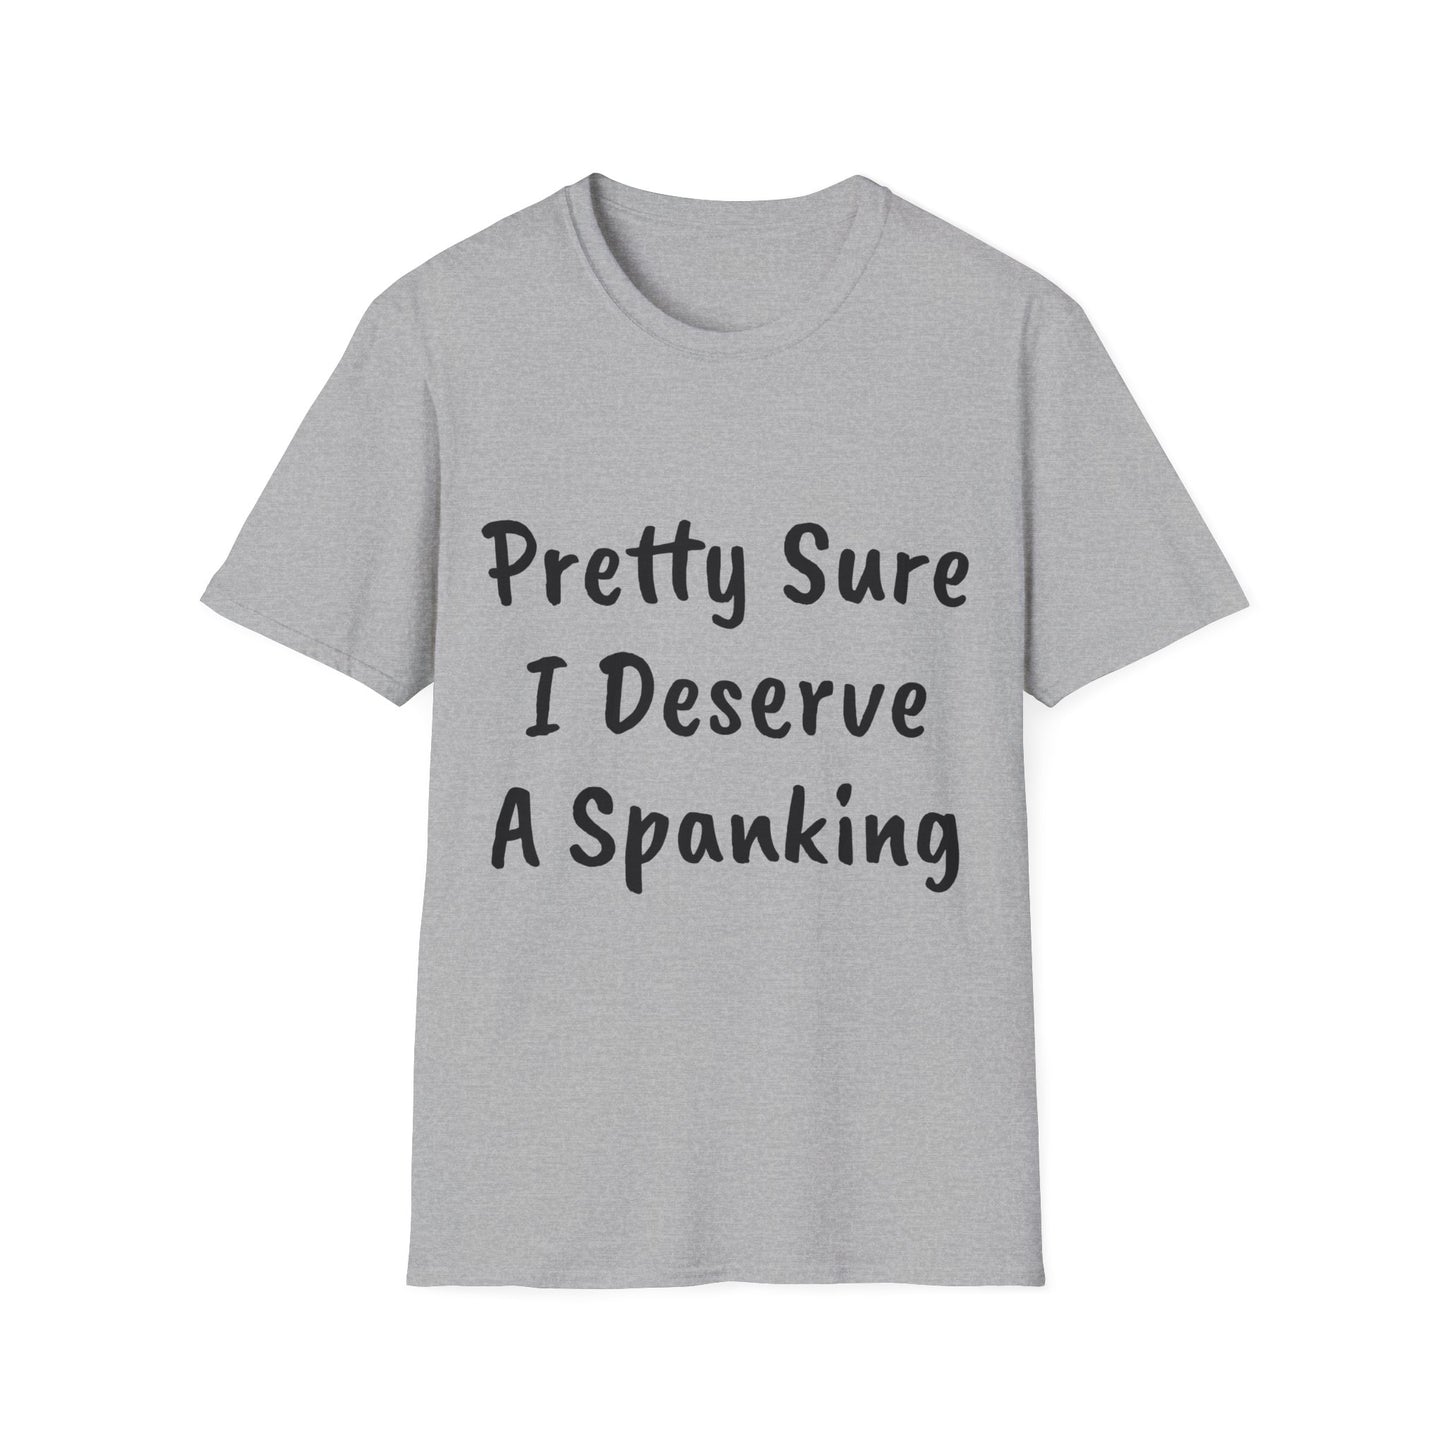 BDSM T-Shirt - Funny Naughty Tee - Pretty Sure I Deserve A Spanking Unisex Softstyle T-Shirt